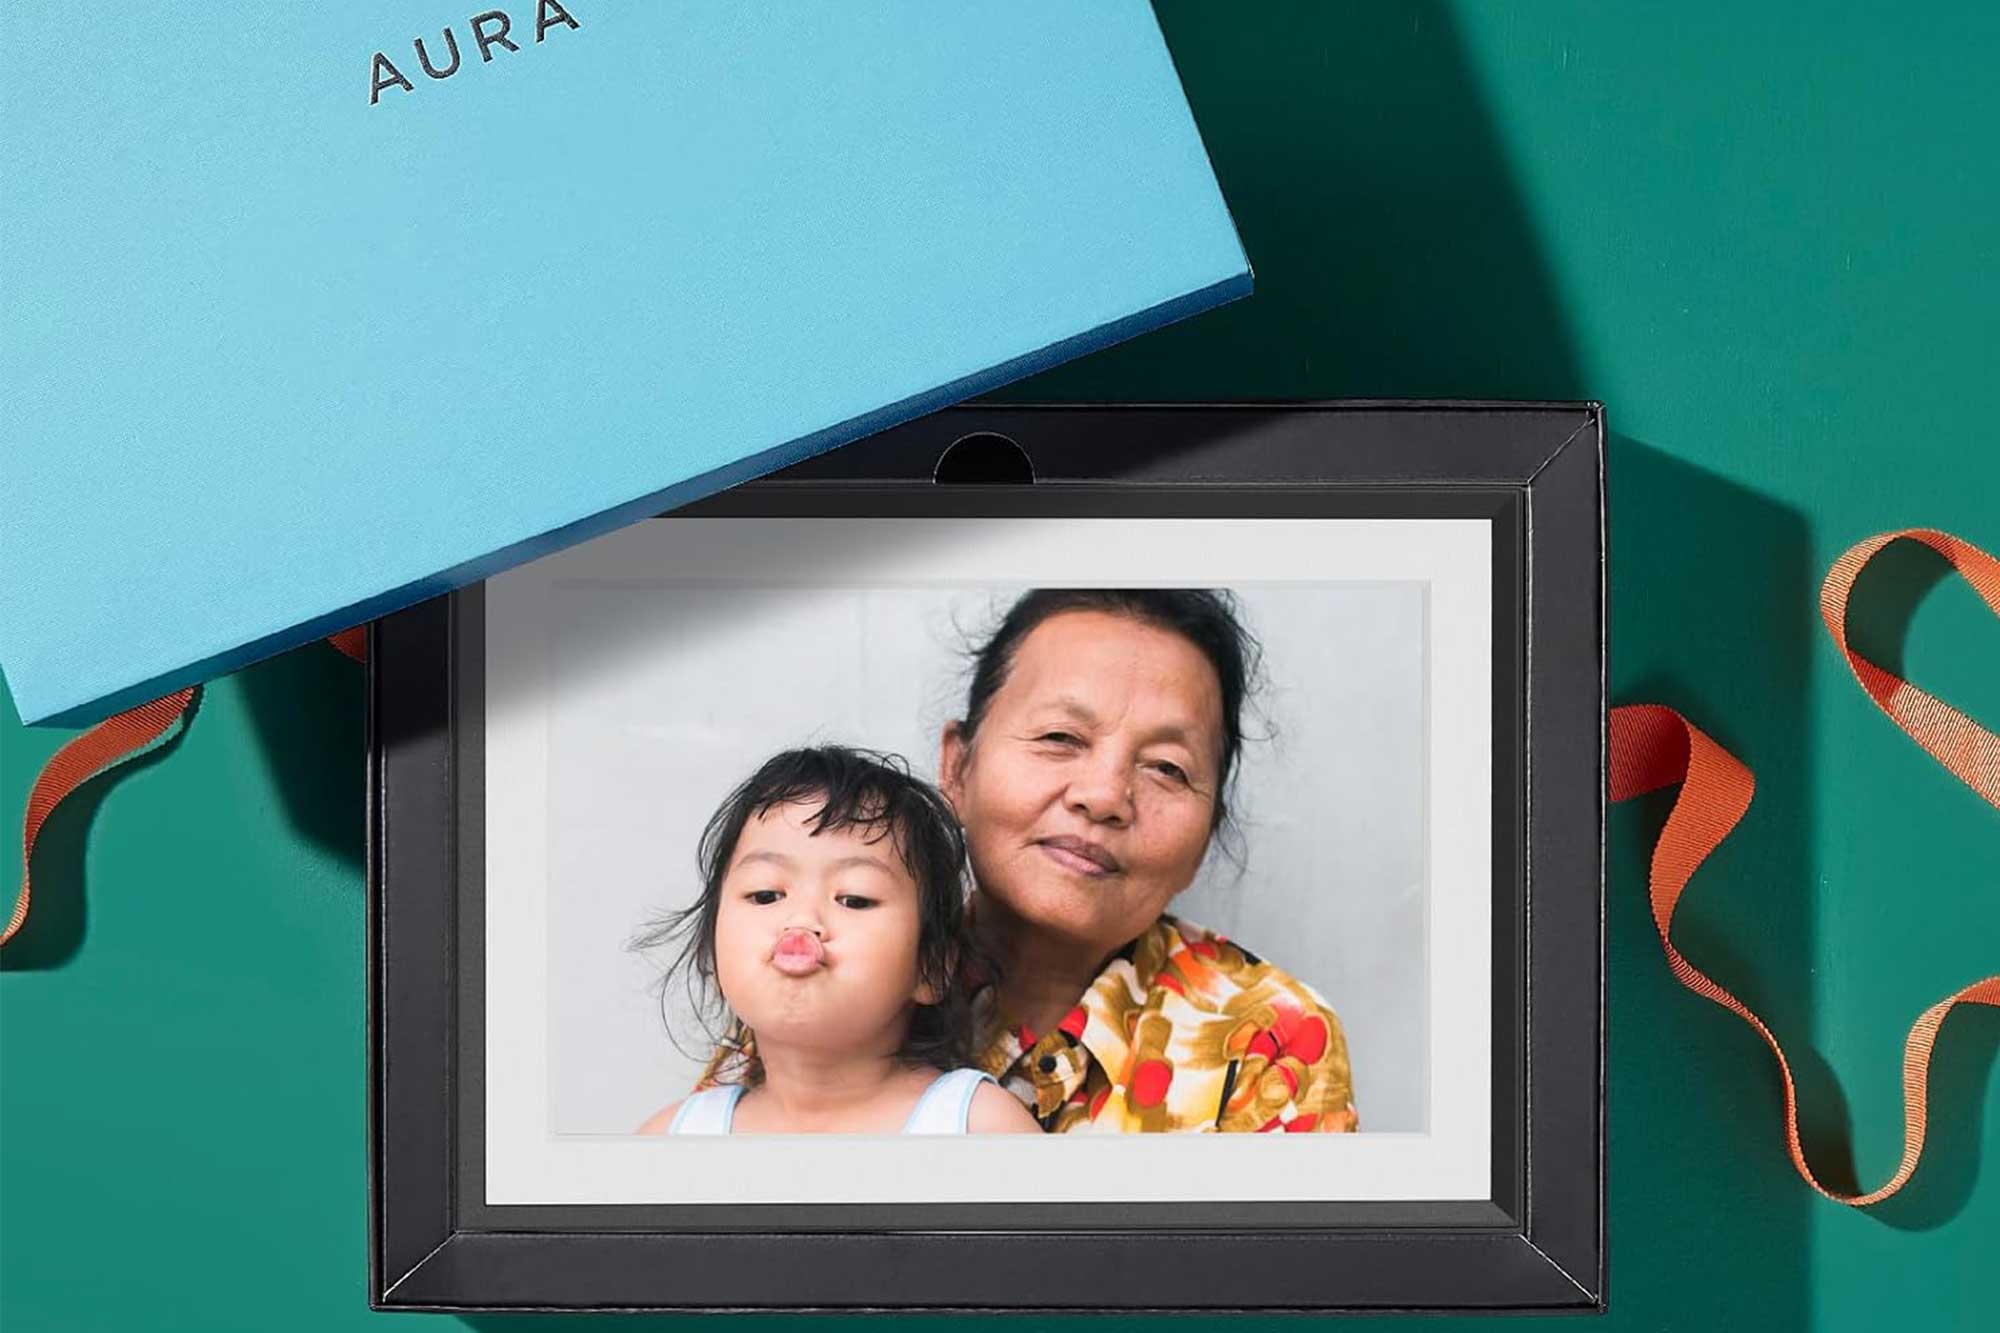 This Aura digital picture frame is on sale, just in time for Mother’s Day